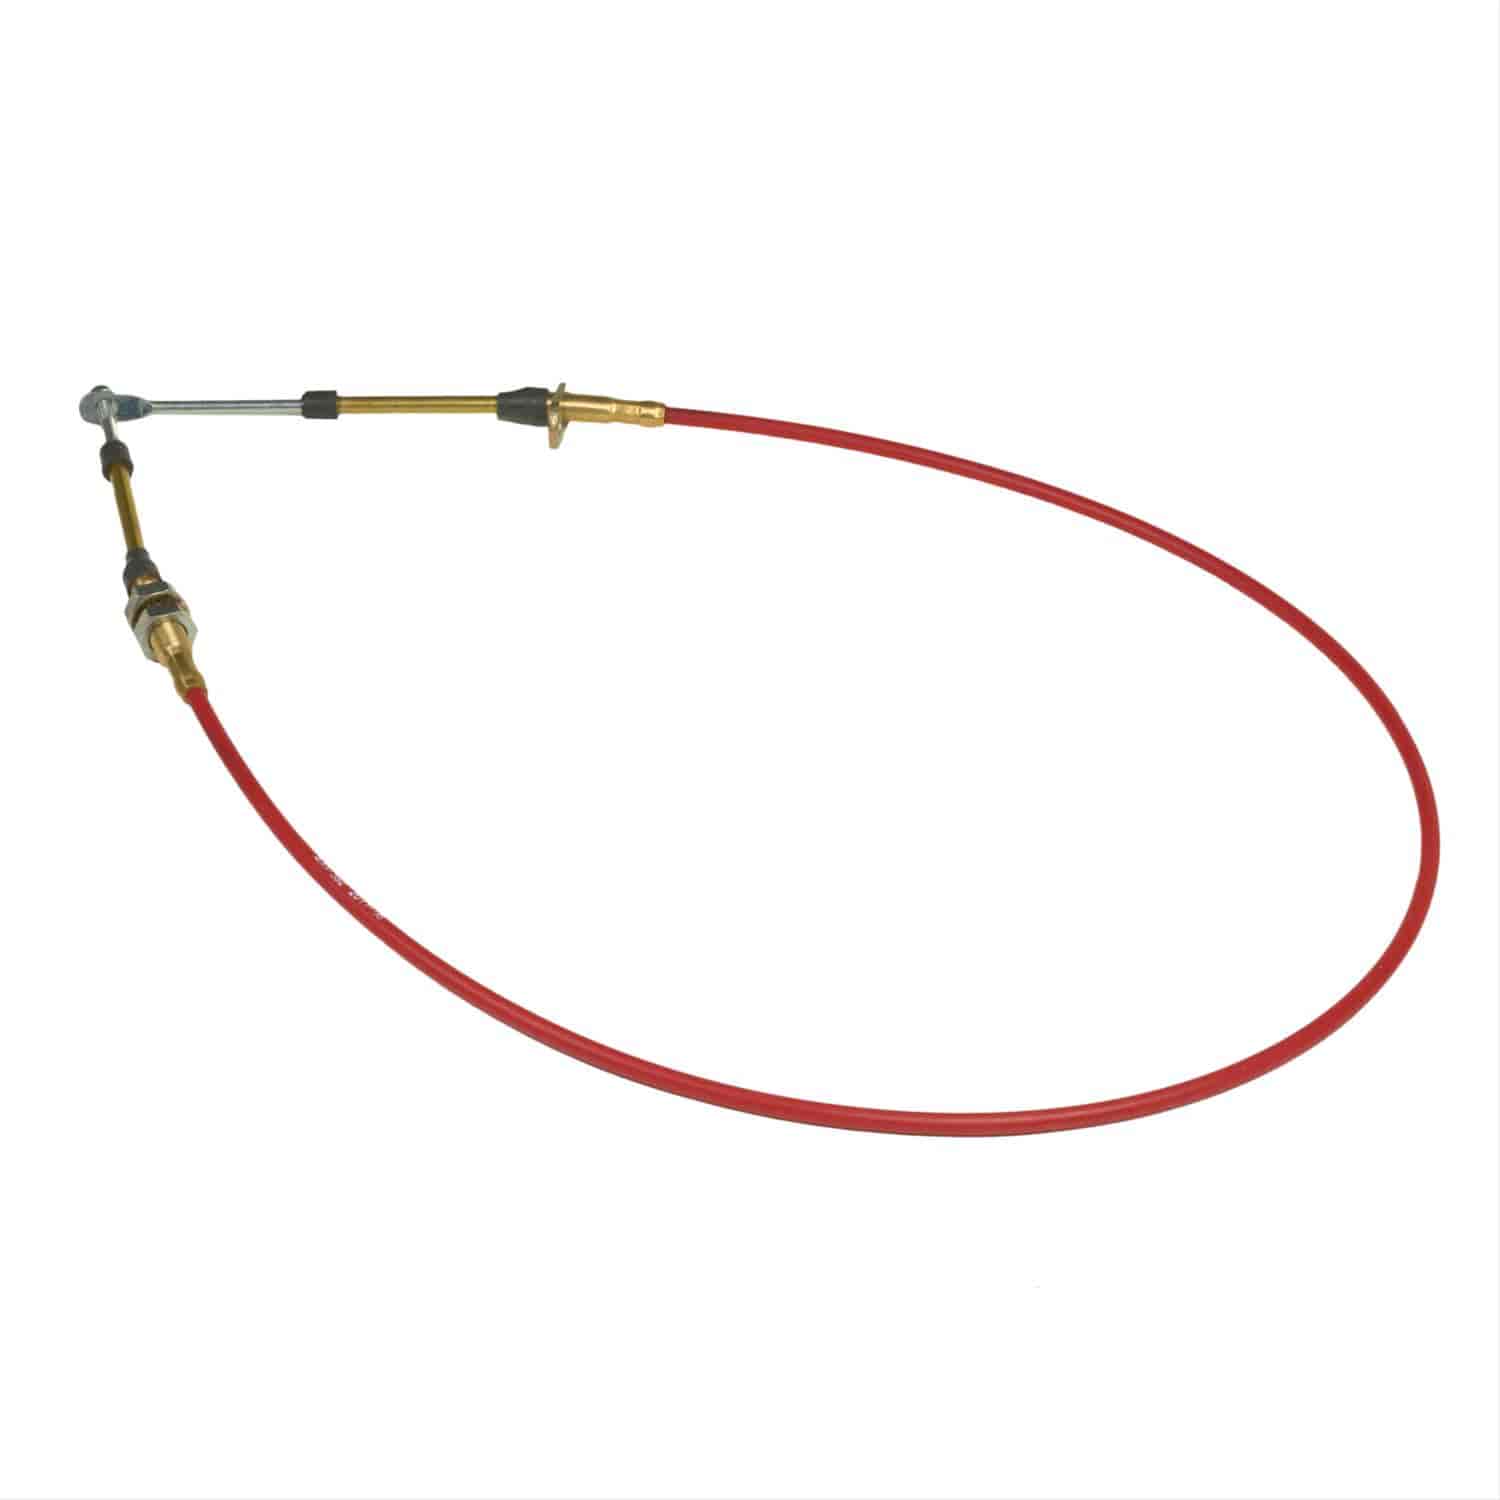 B&M Automatic Performance Shifter Cables